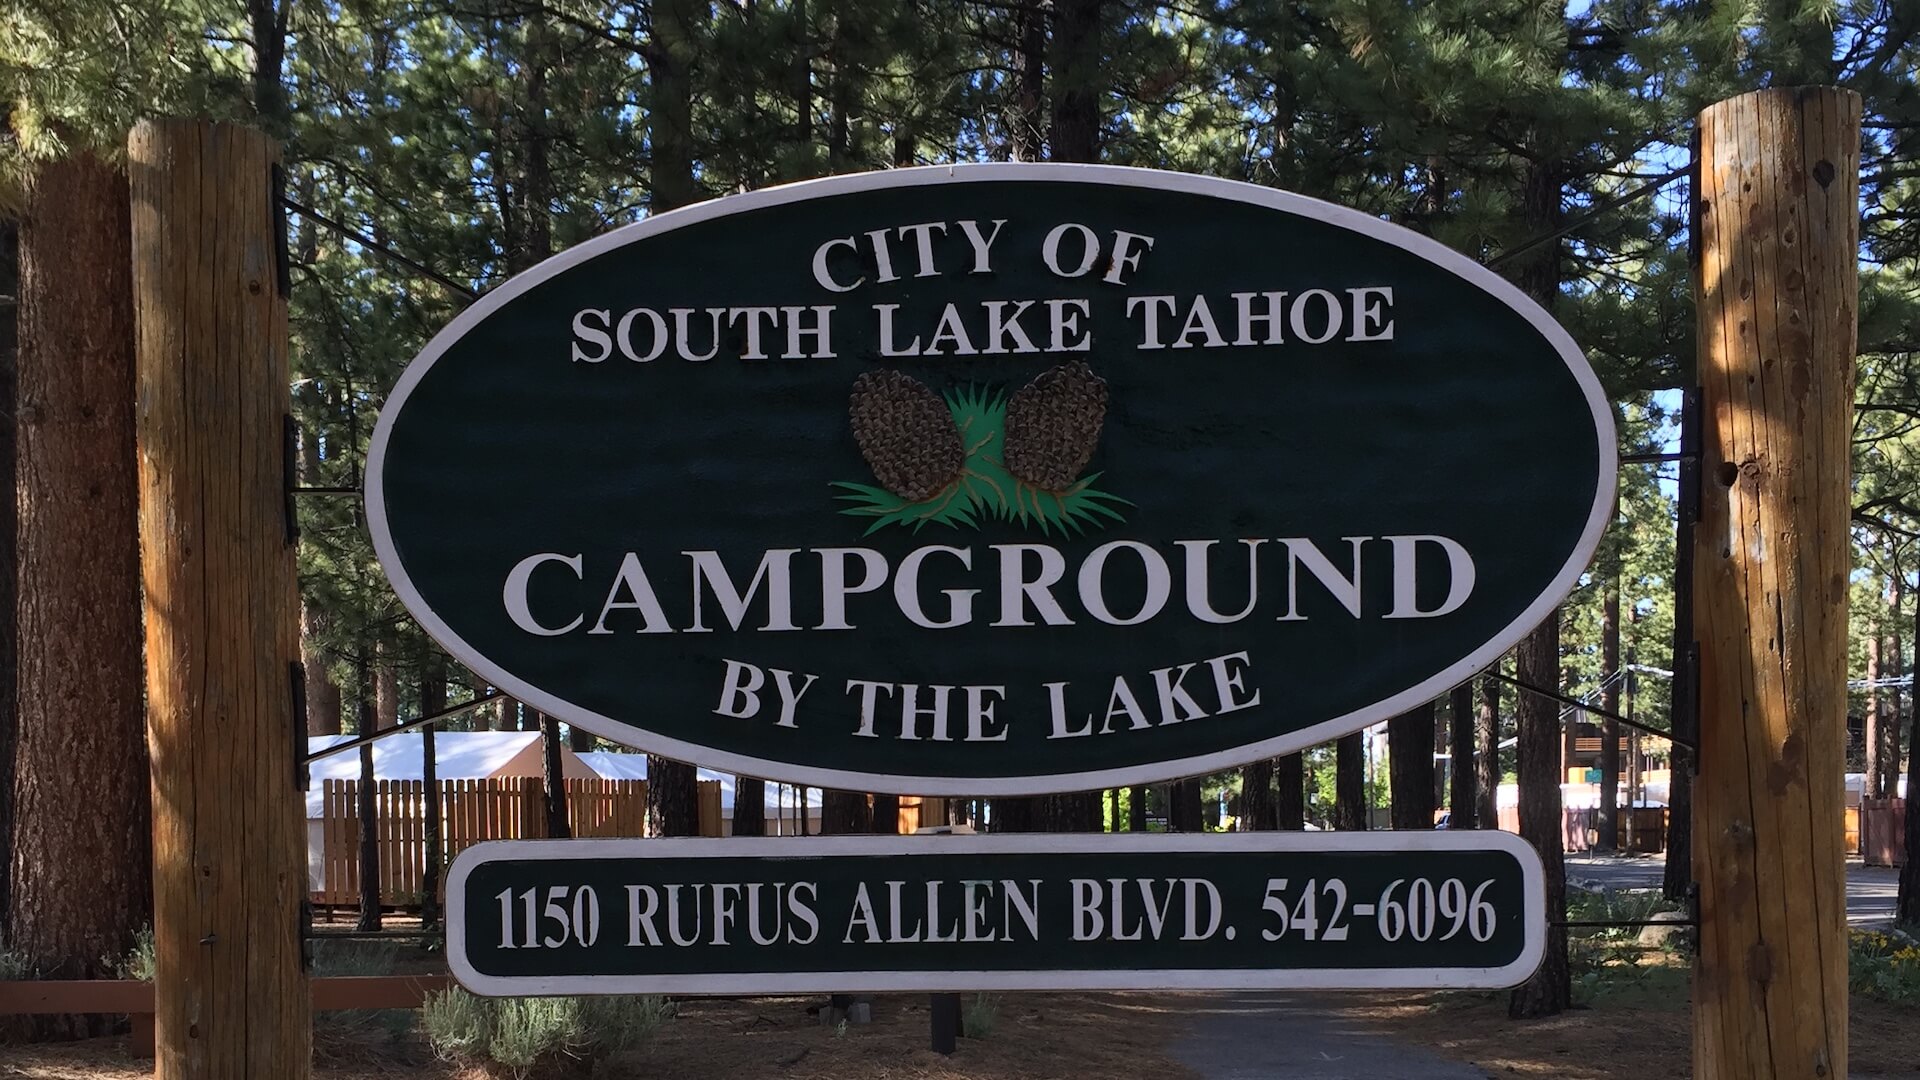 Campground by the Lake - City of South Lake Tahoe